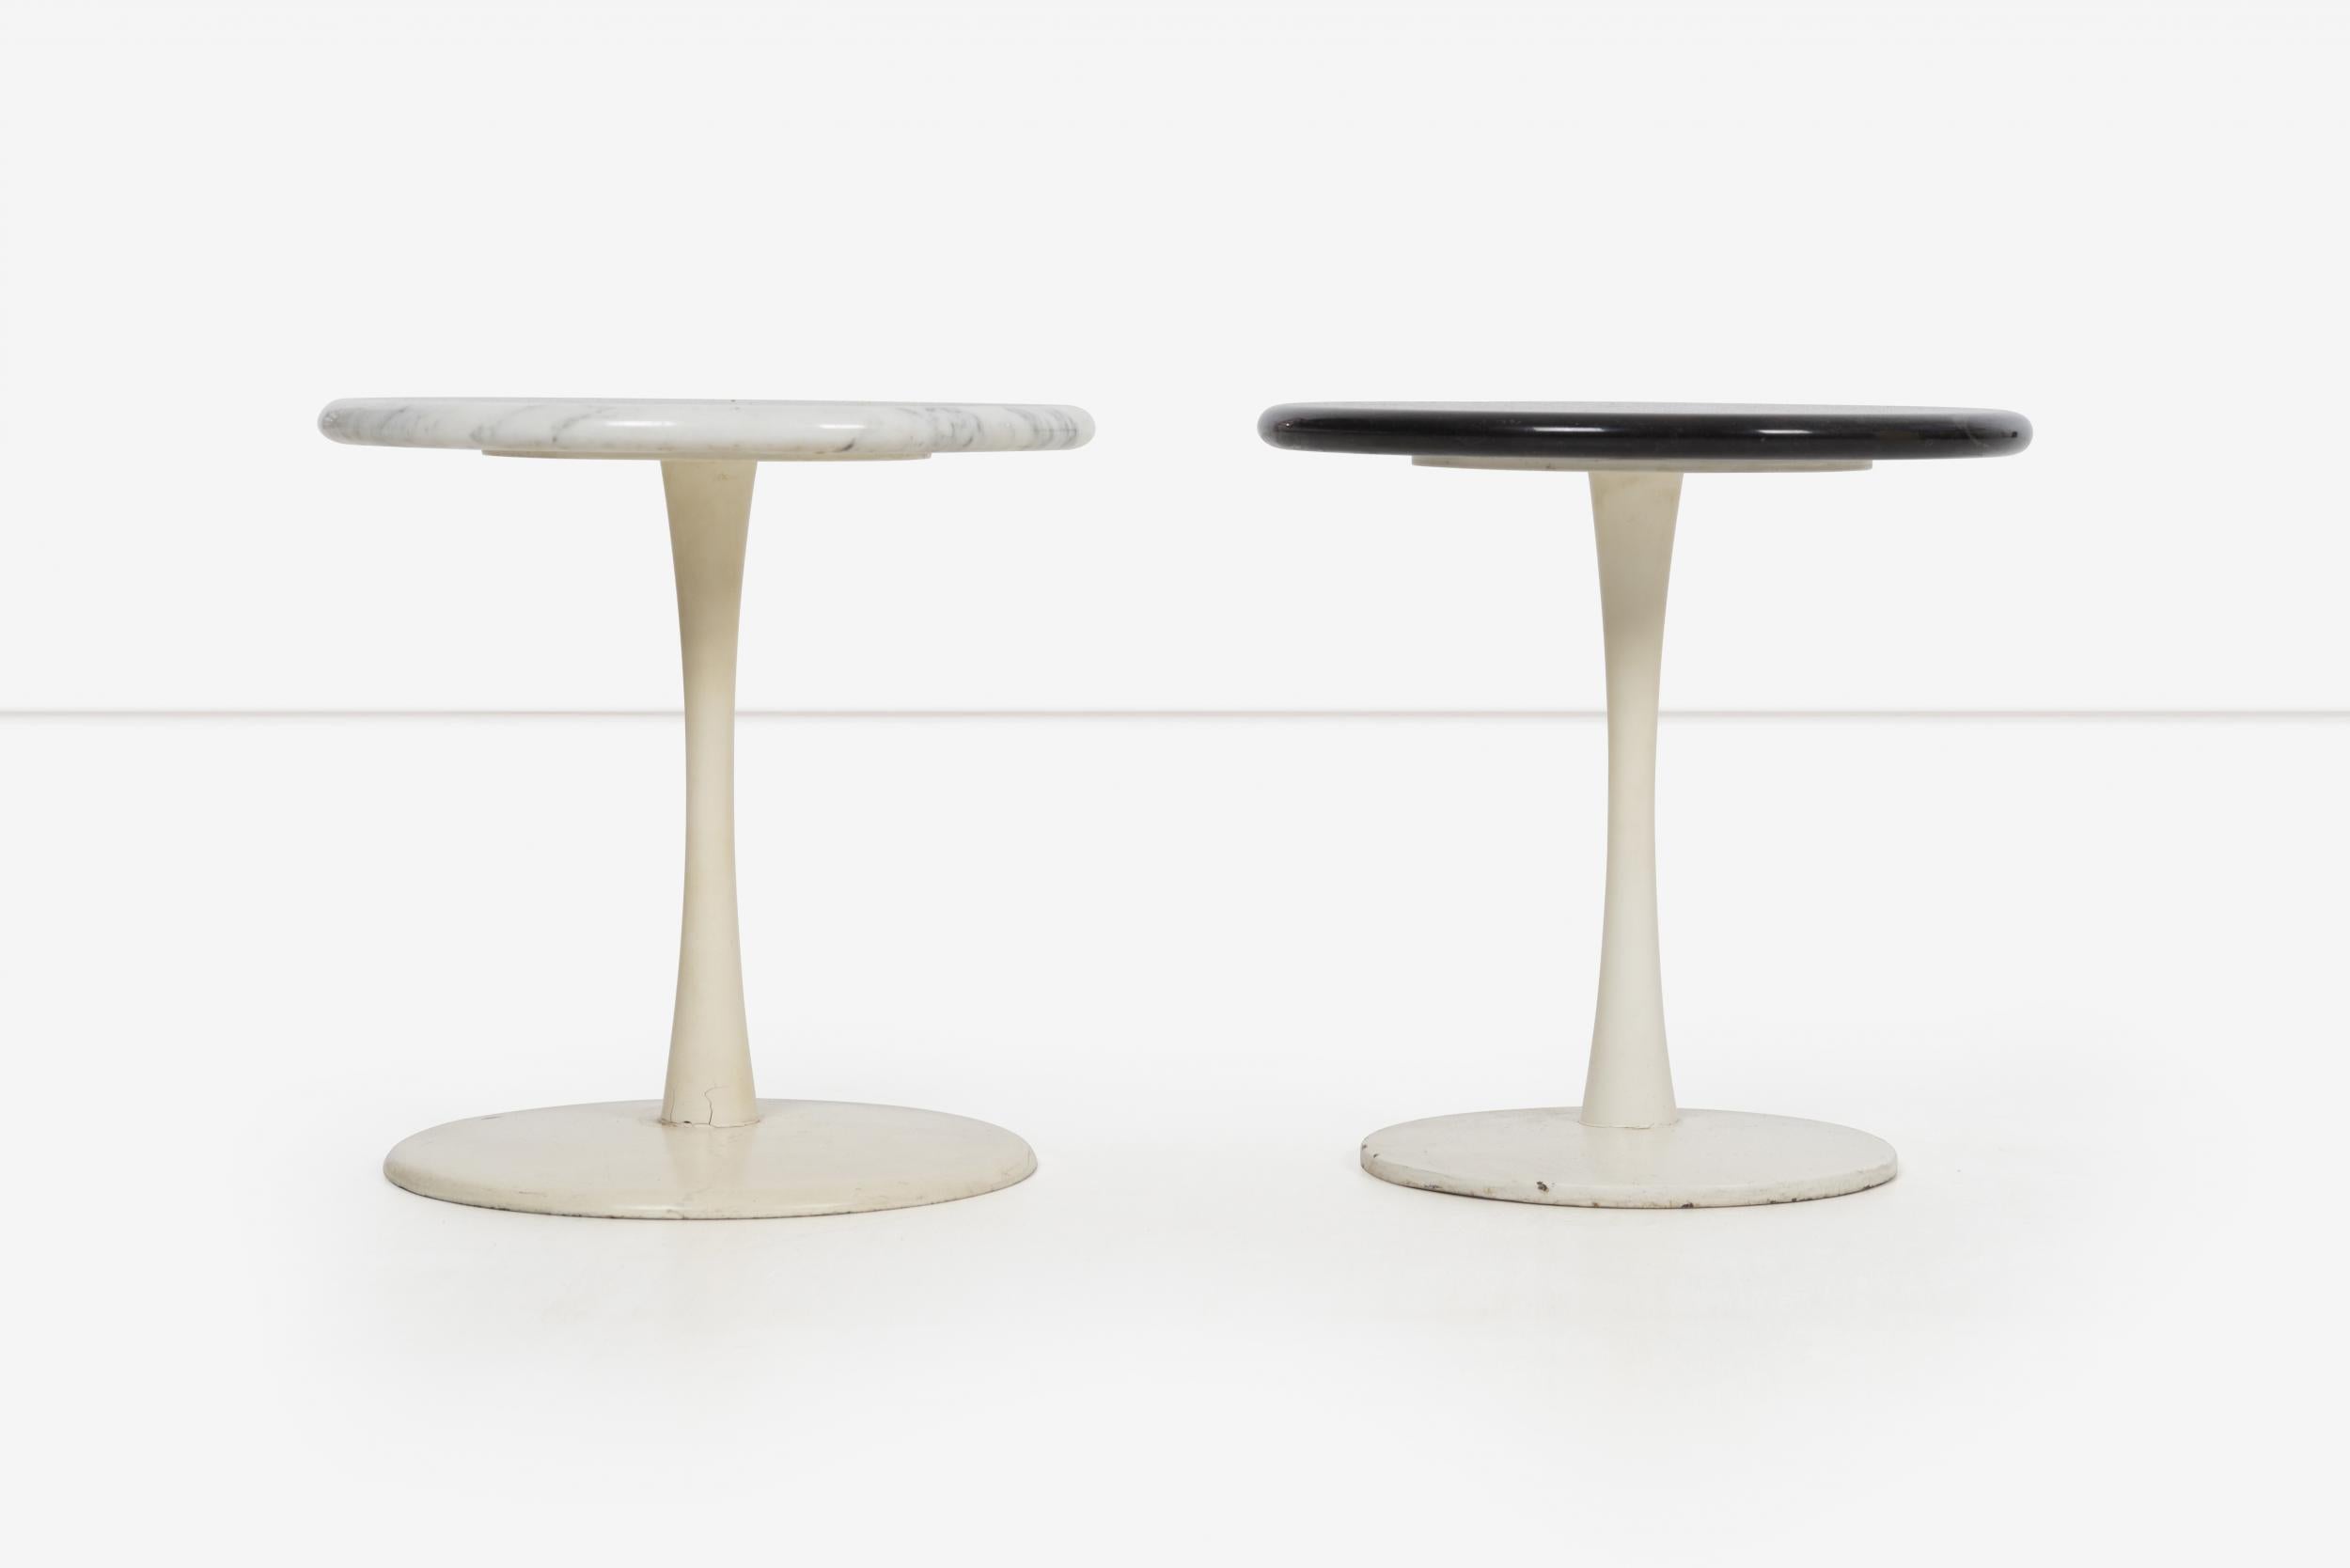 Pair of Laverne Stem tables for Laverne International, models ST-12 and ST-2 weighted cast iron bases matte white finish with solid black and white 3/4